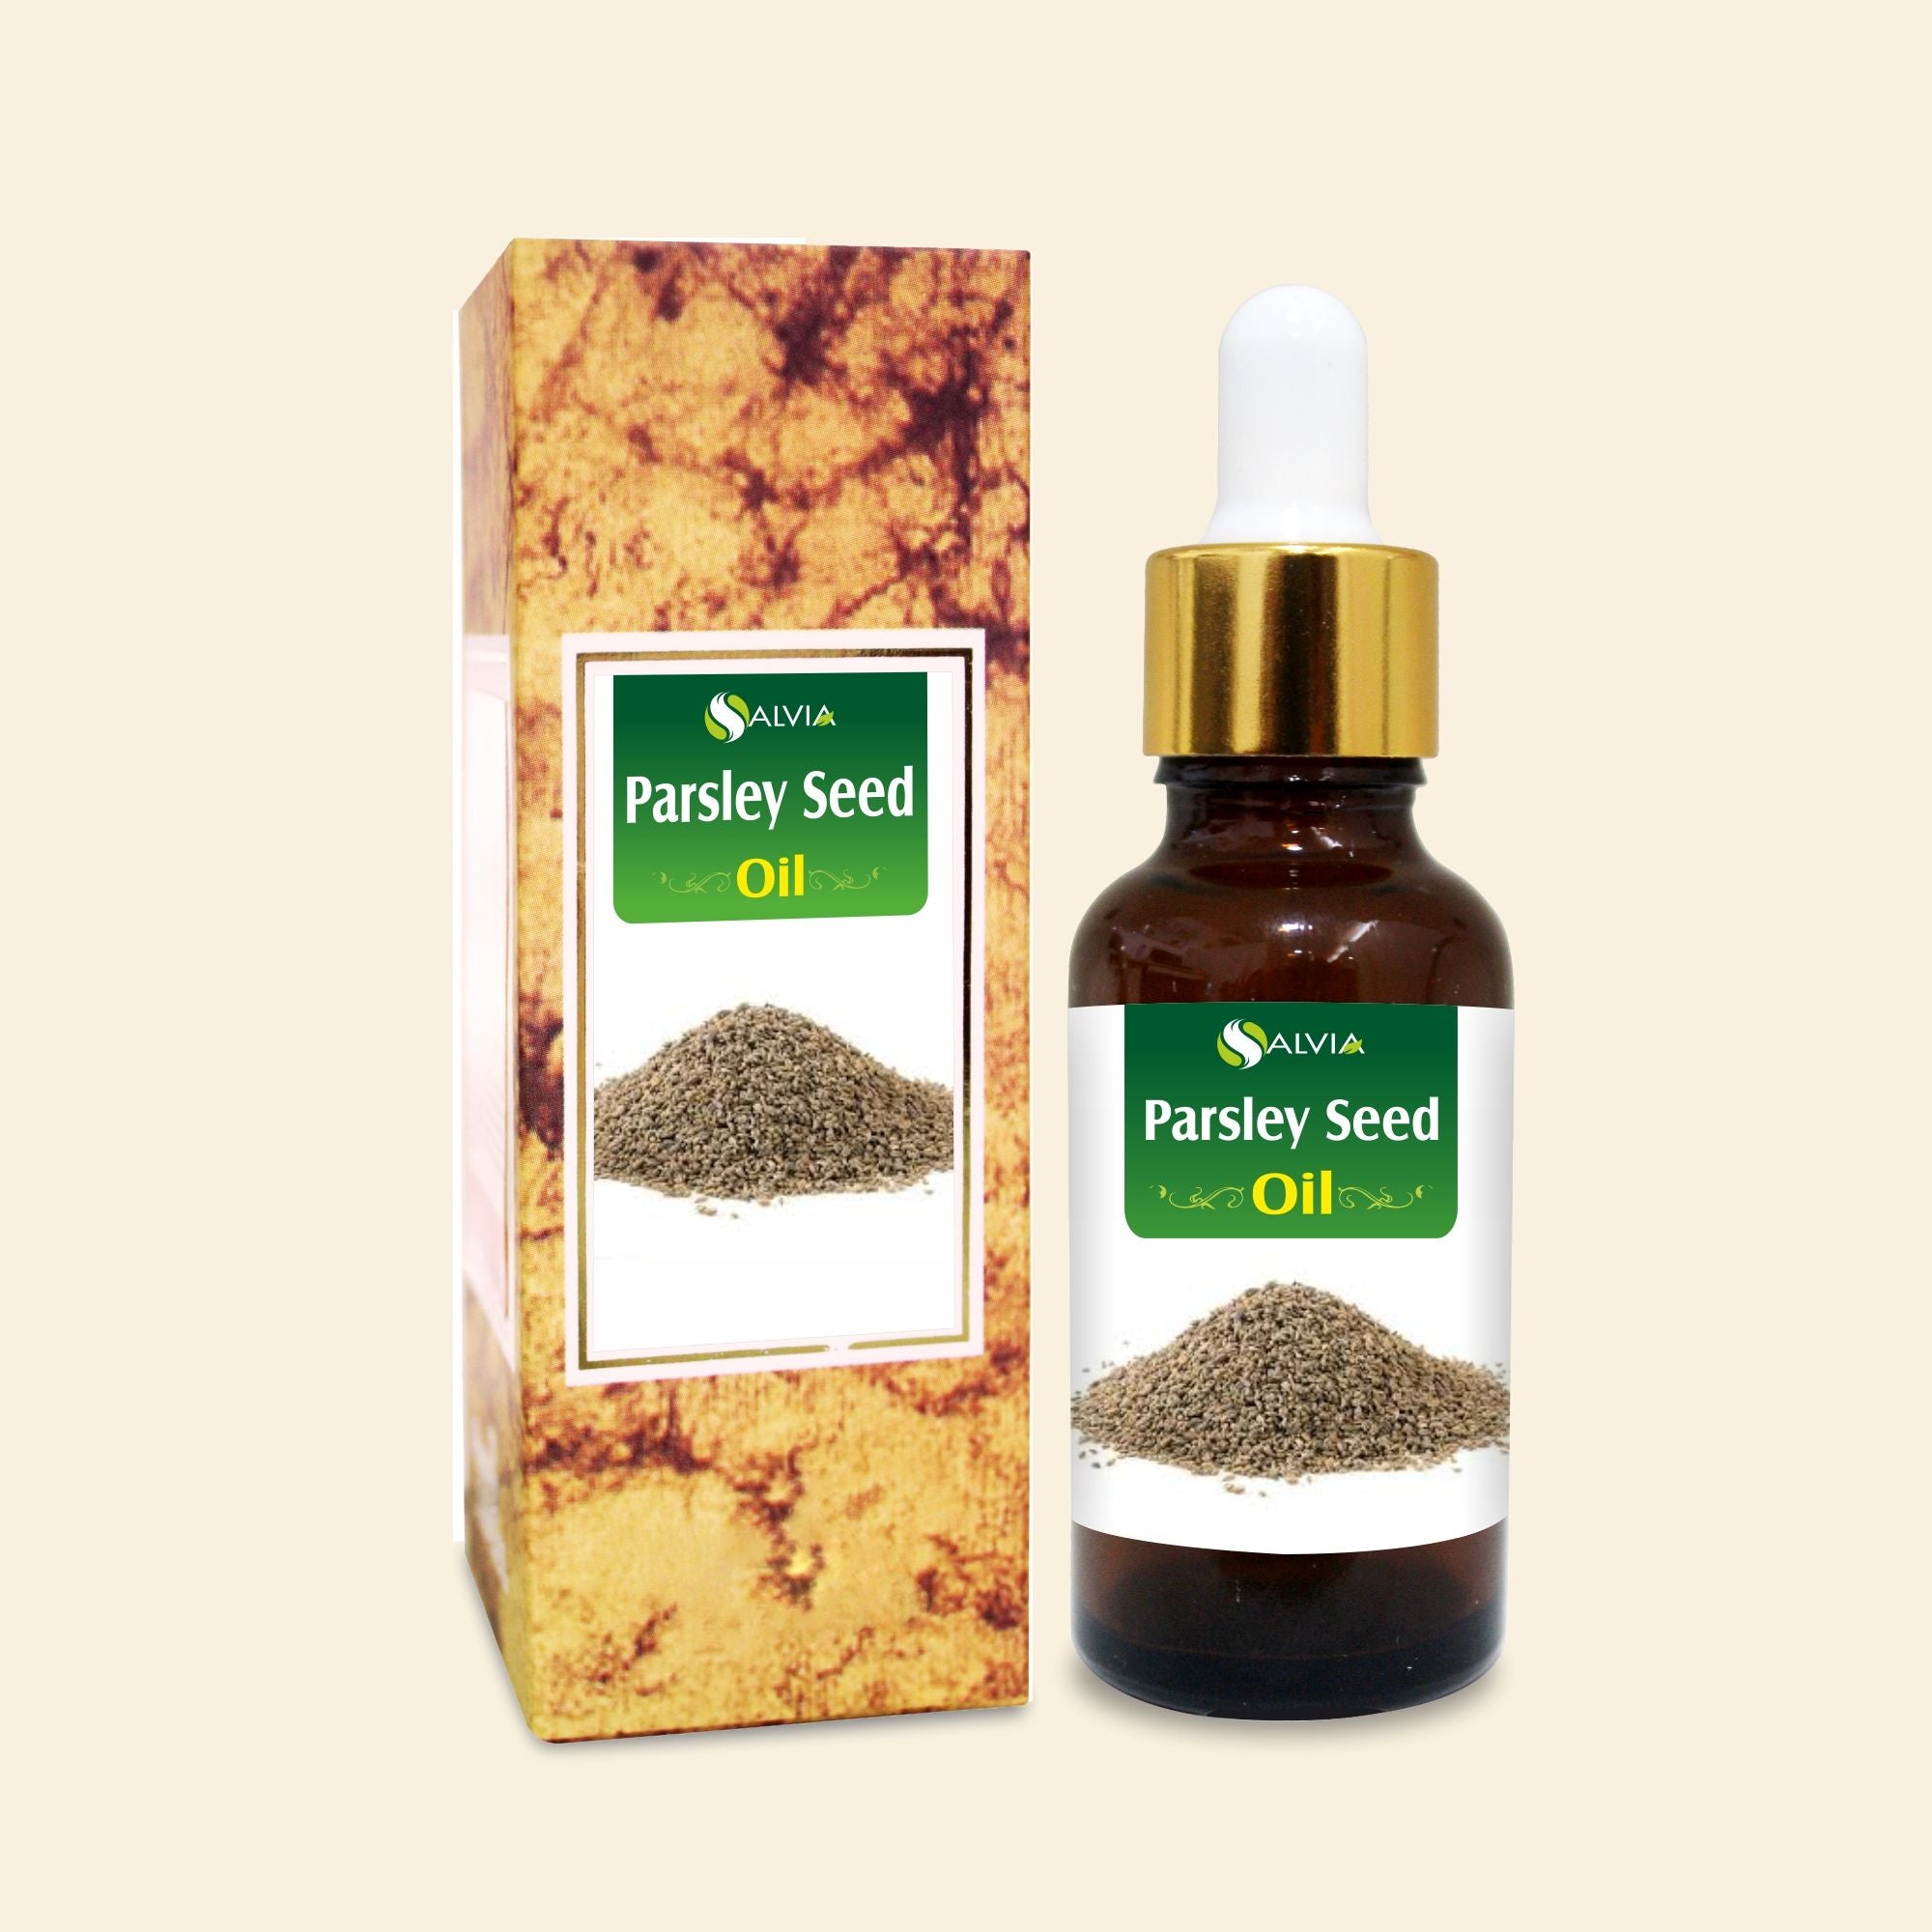 Salvia Natural Essential Oils Parsley Seed Oil